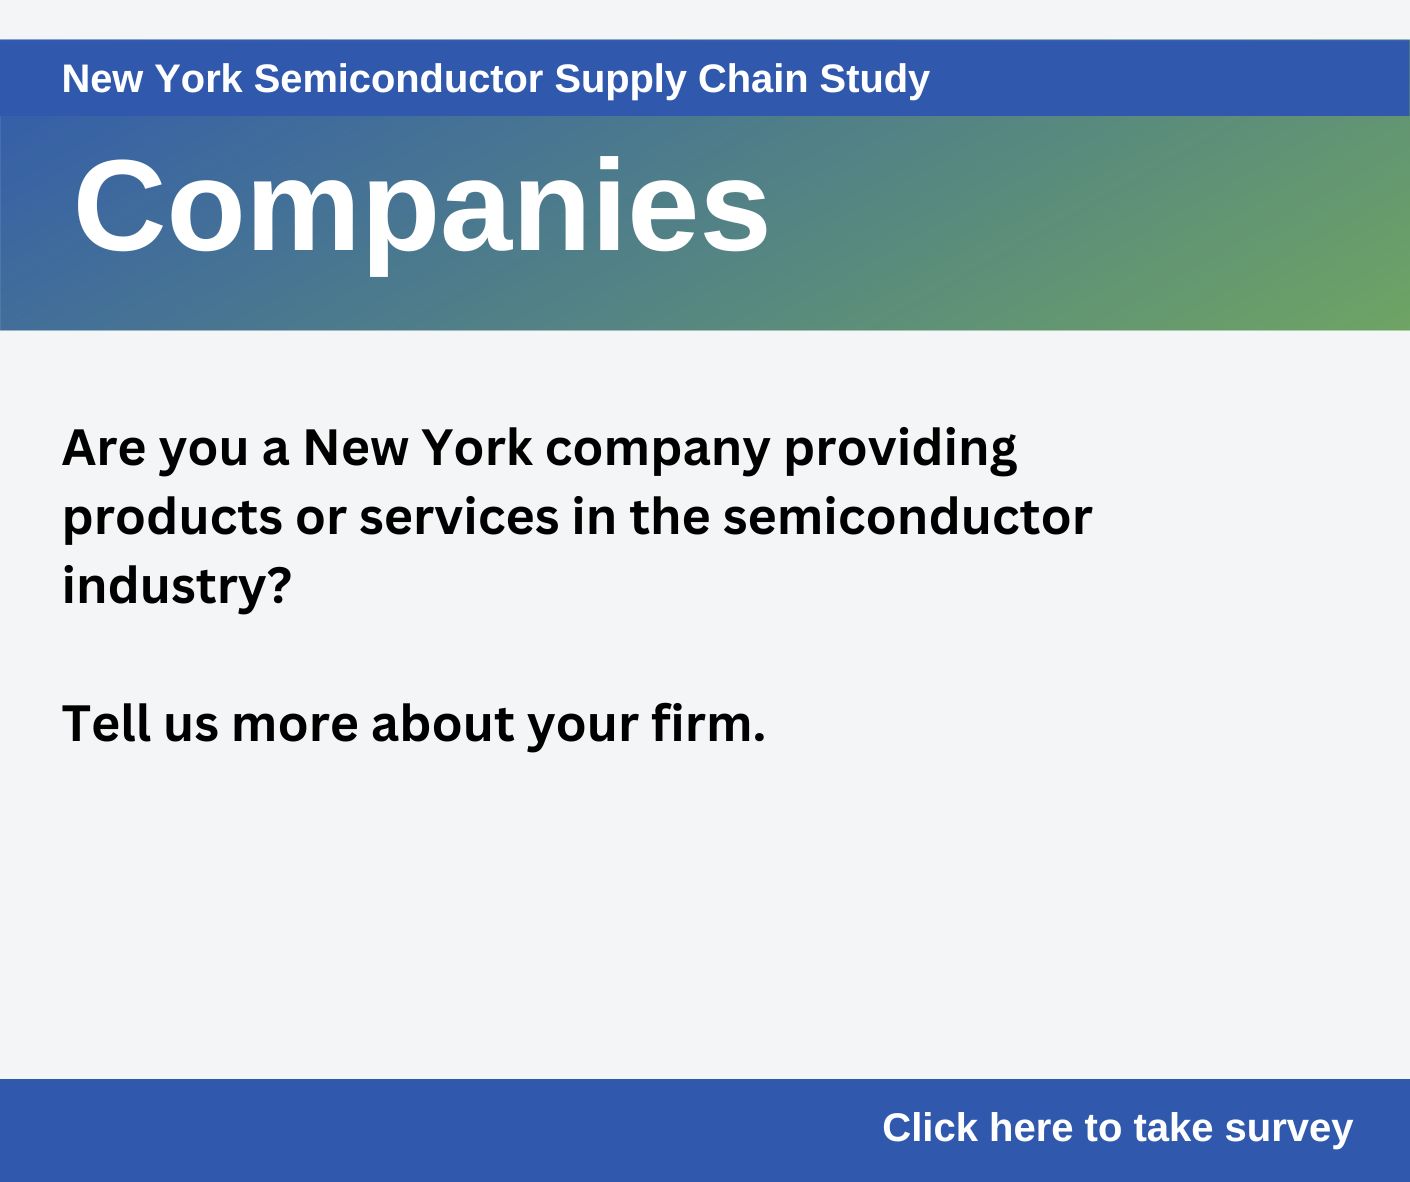 Companies - Are you a New York company providing products or services in the semiconductor industry? Tell us more about your firm.